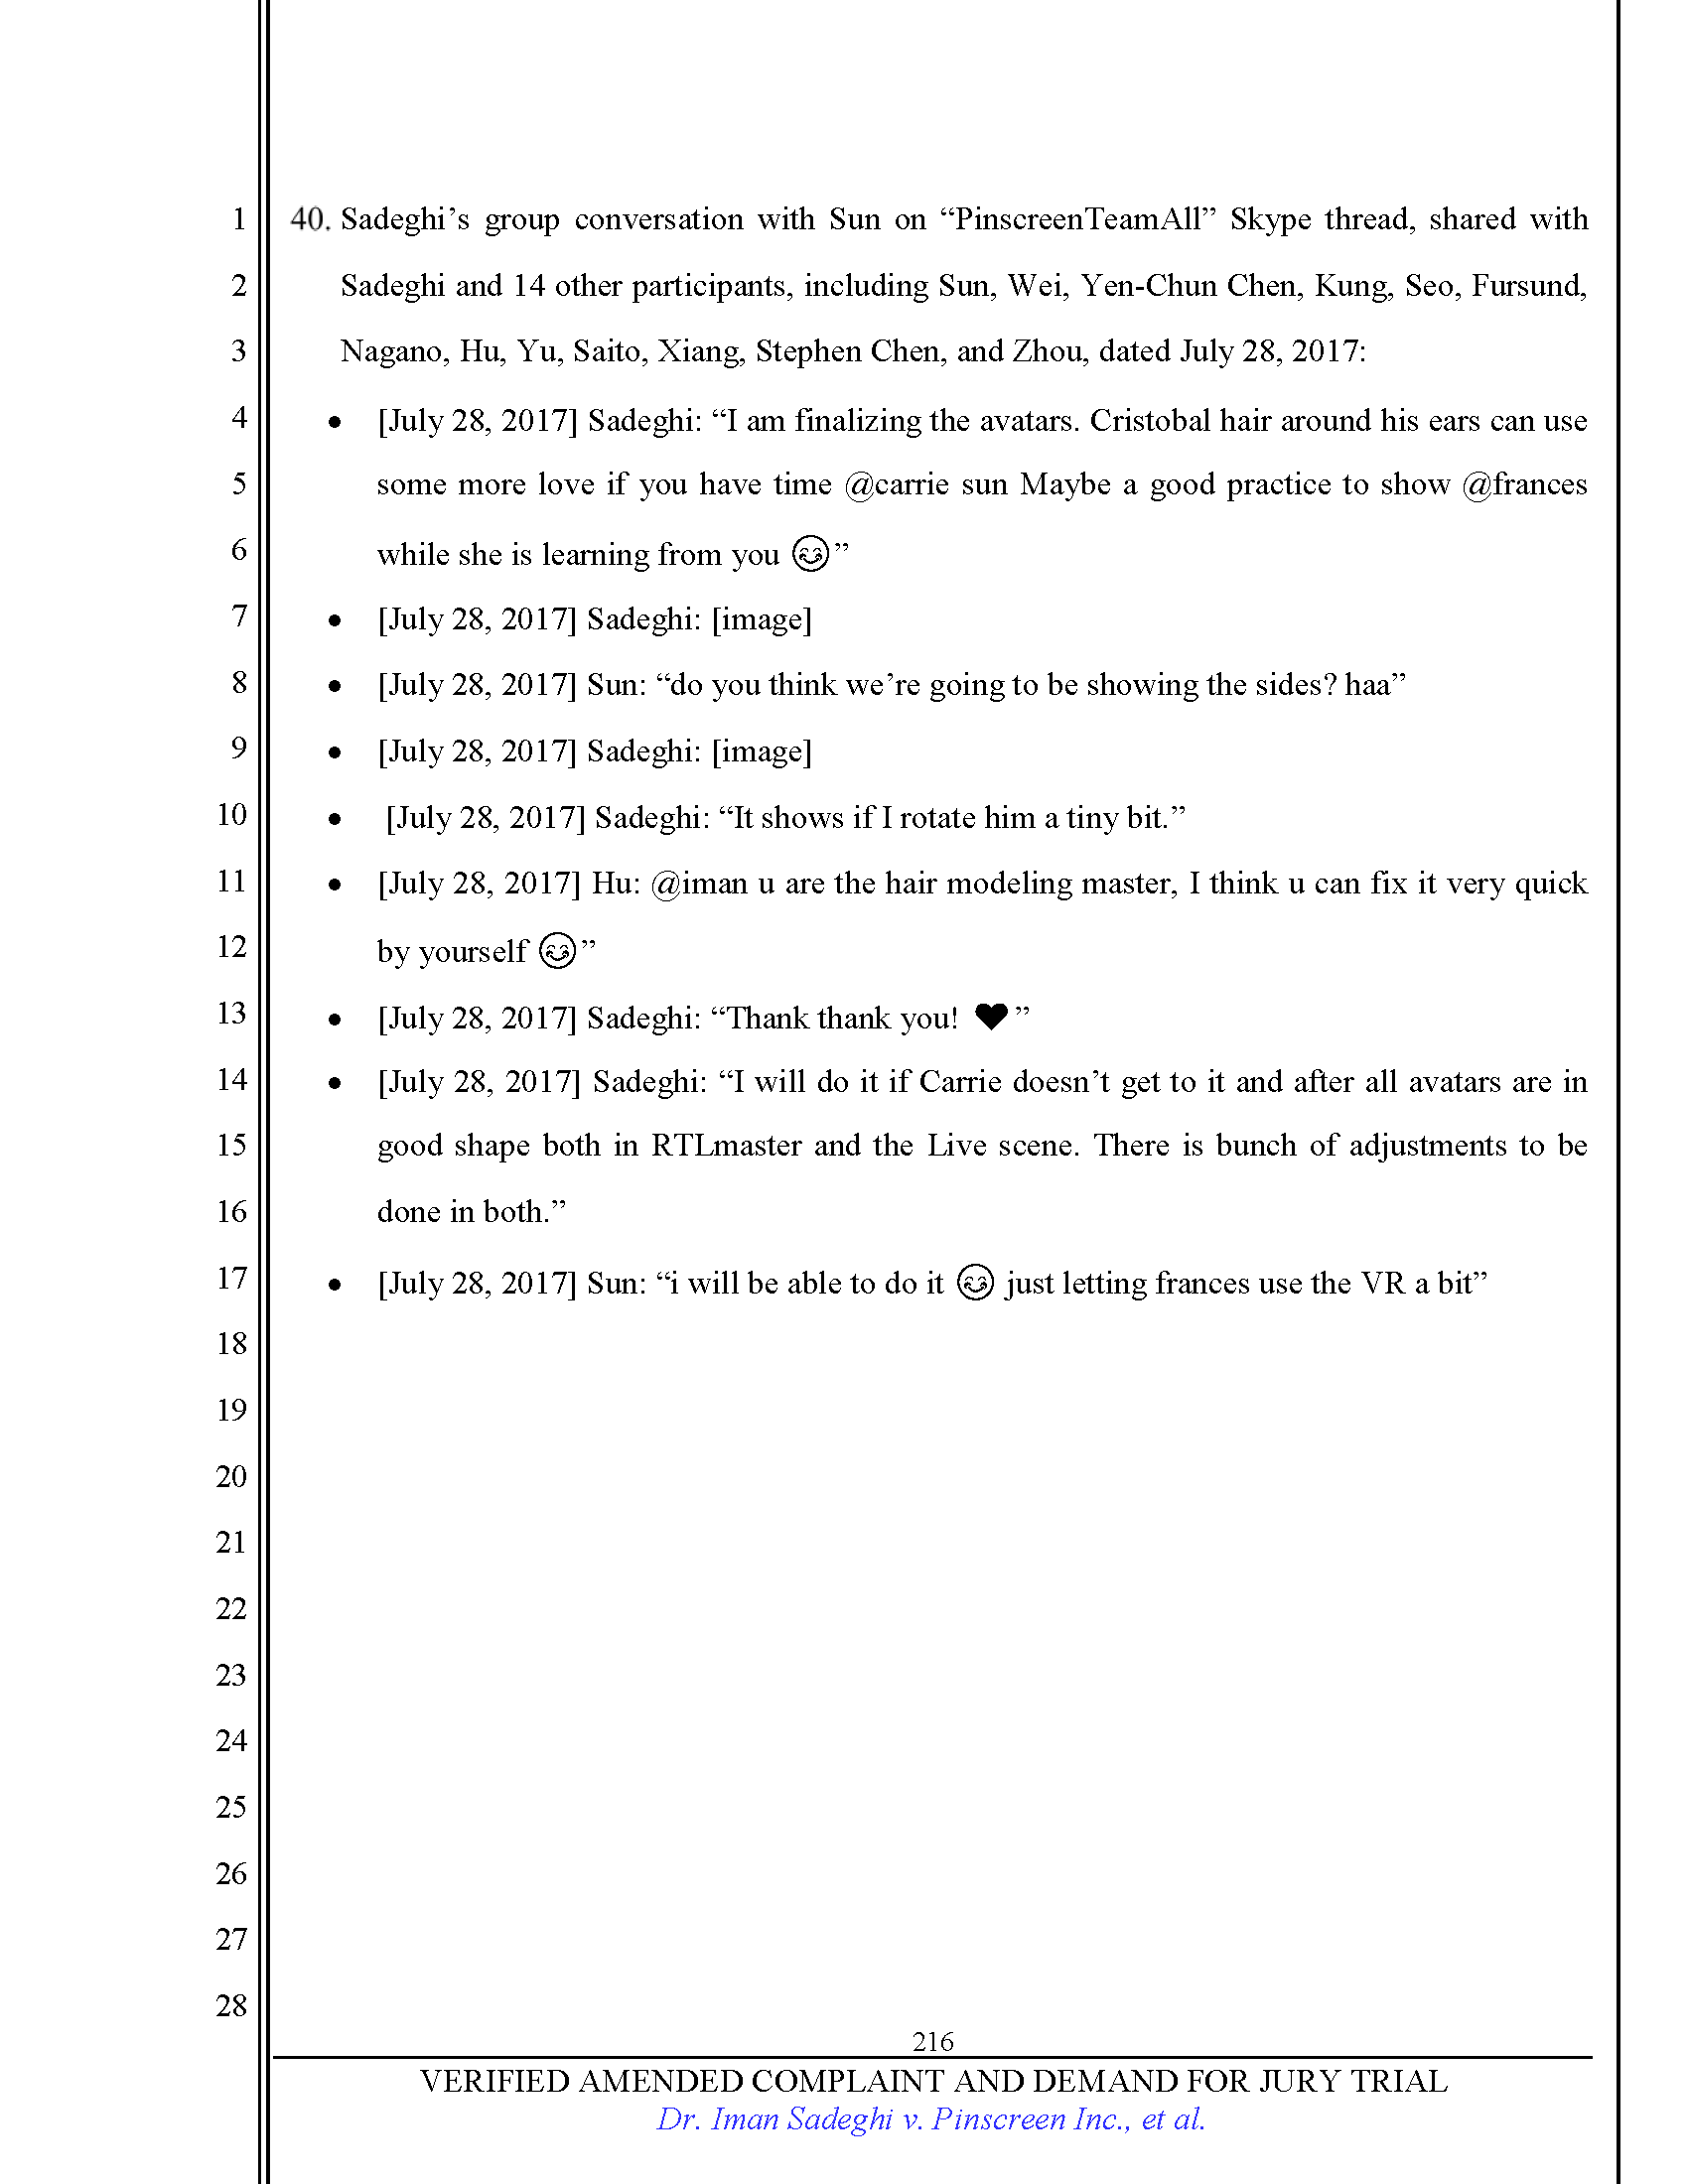 First Amended Complaint (FAC) Page 216